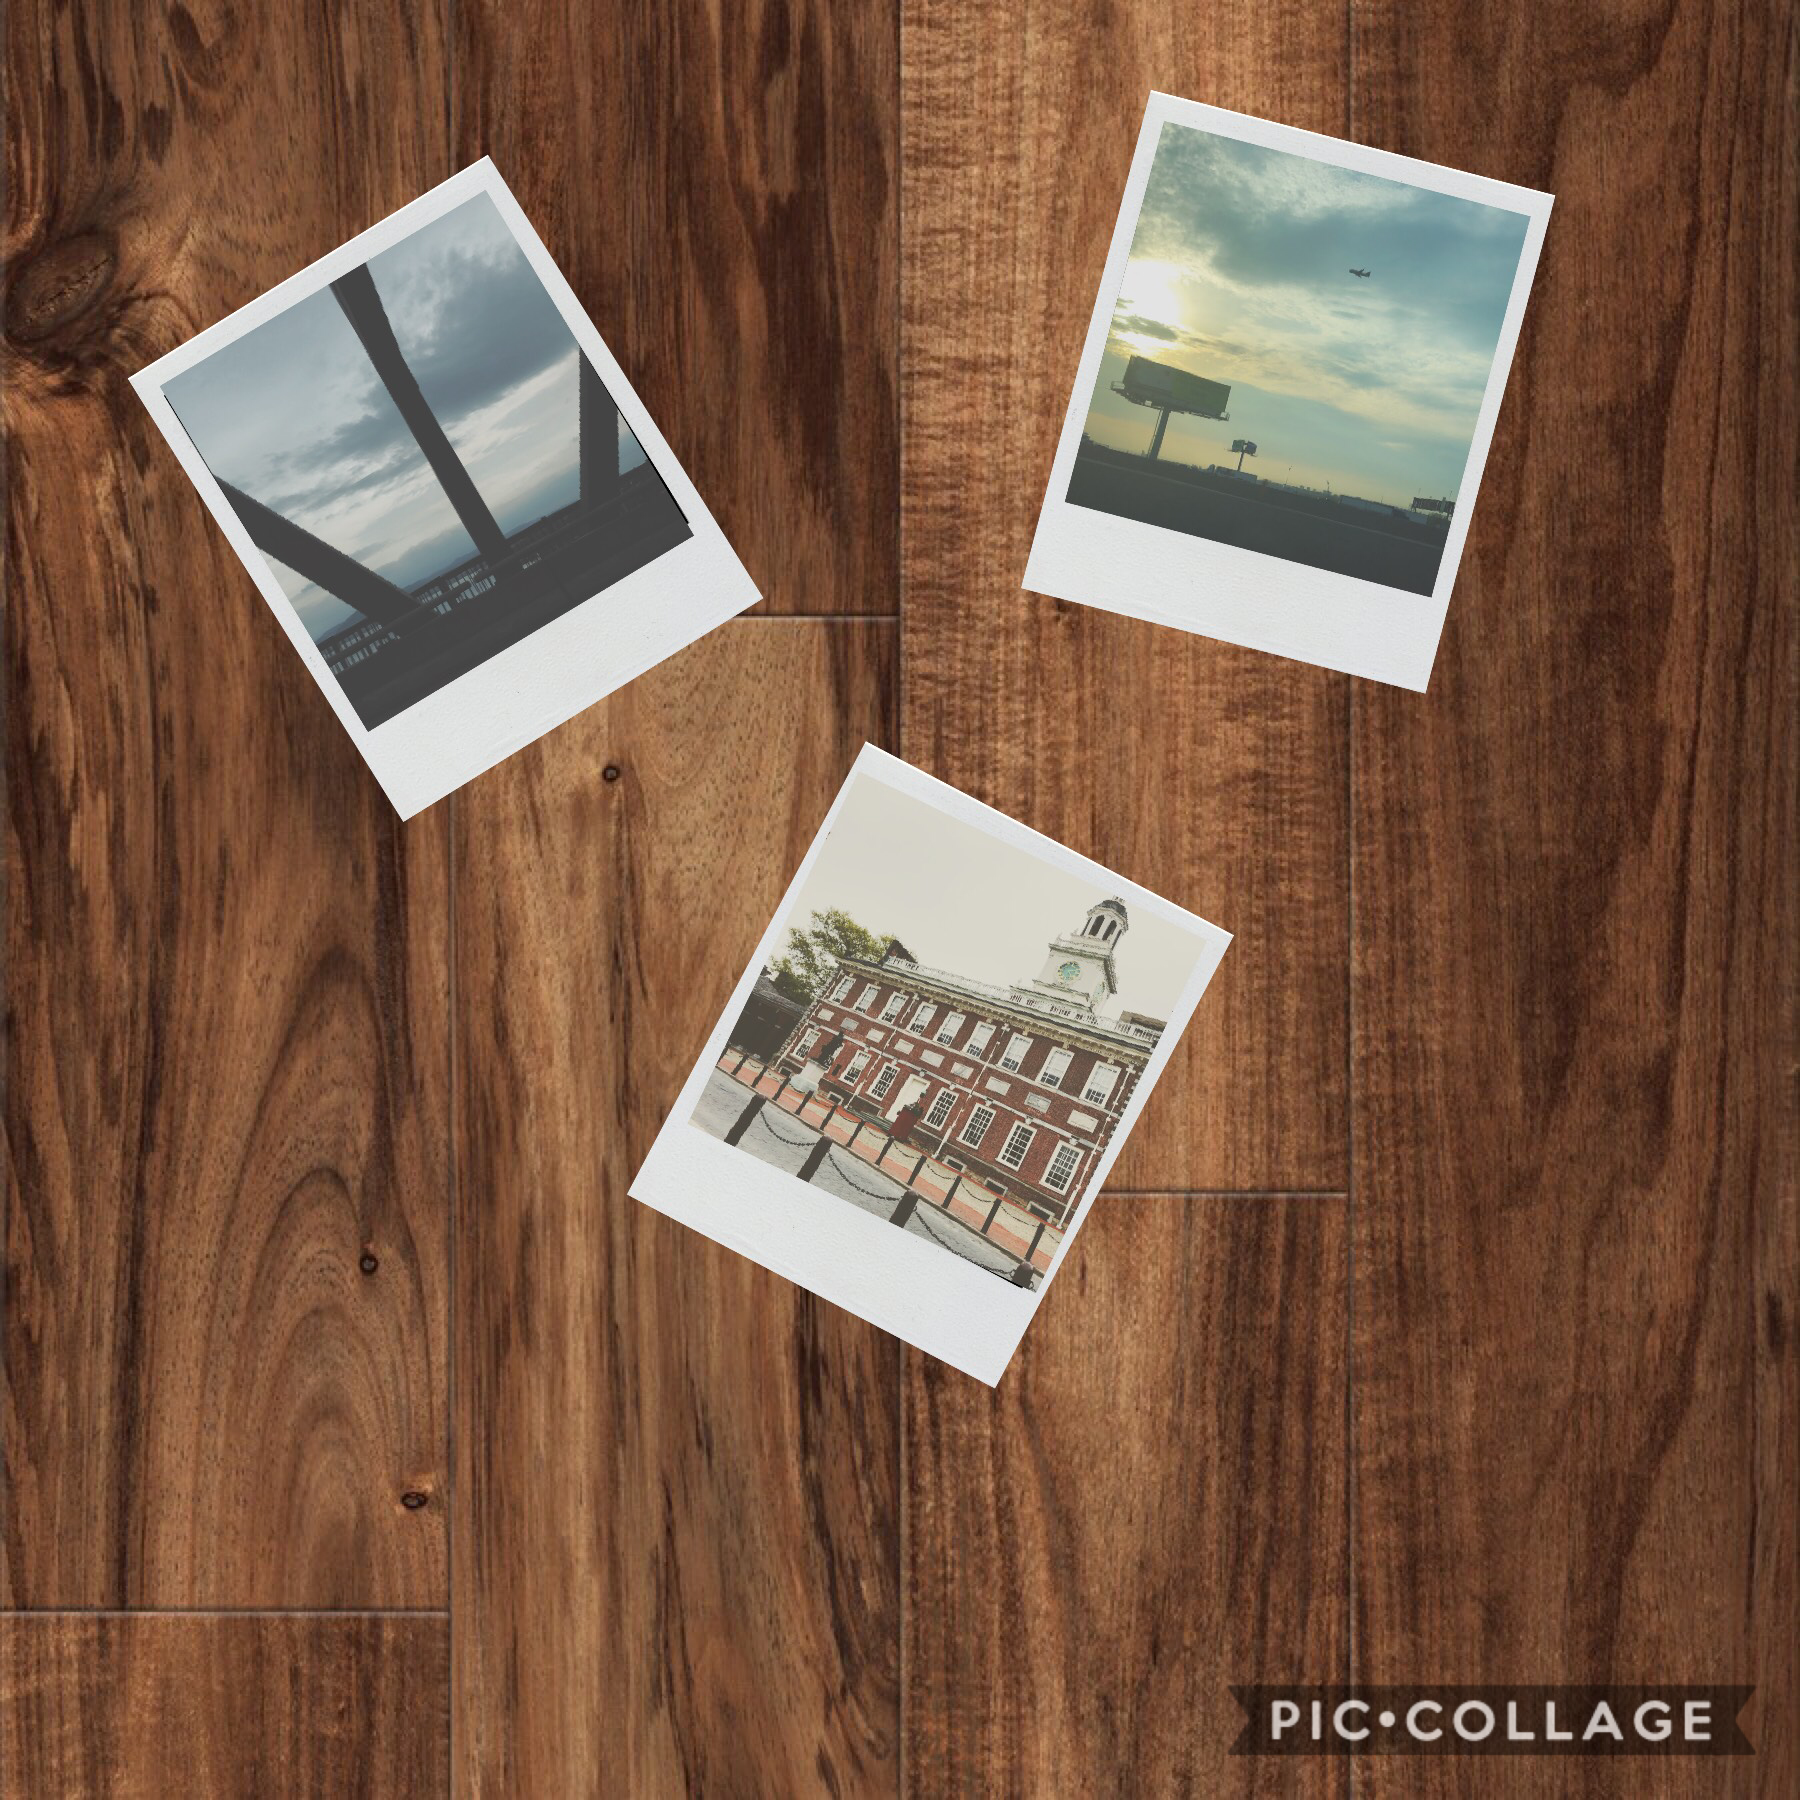 some photos taken on vacation!